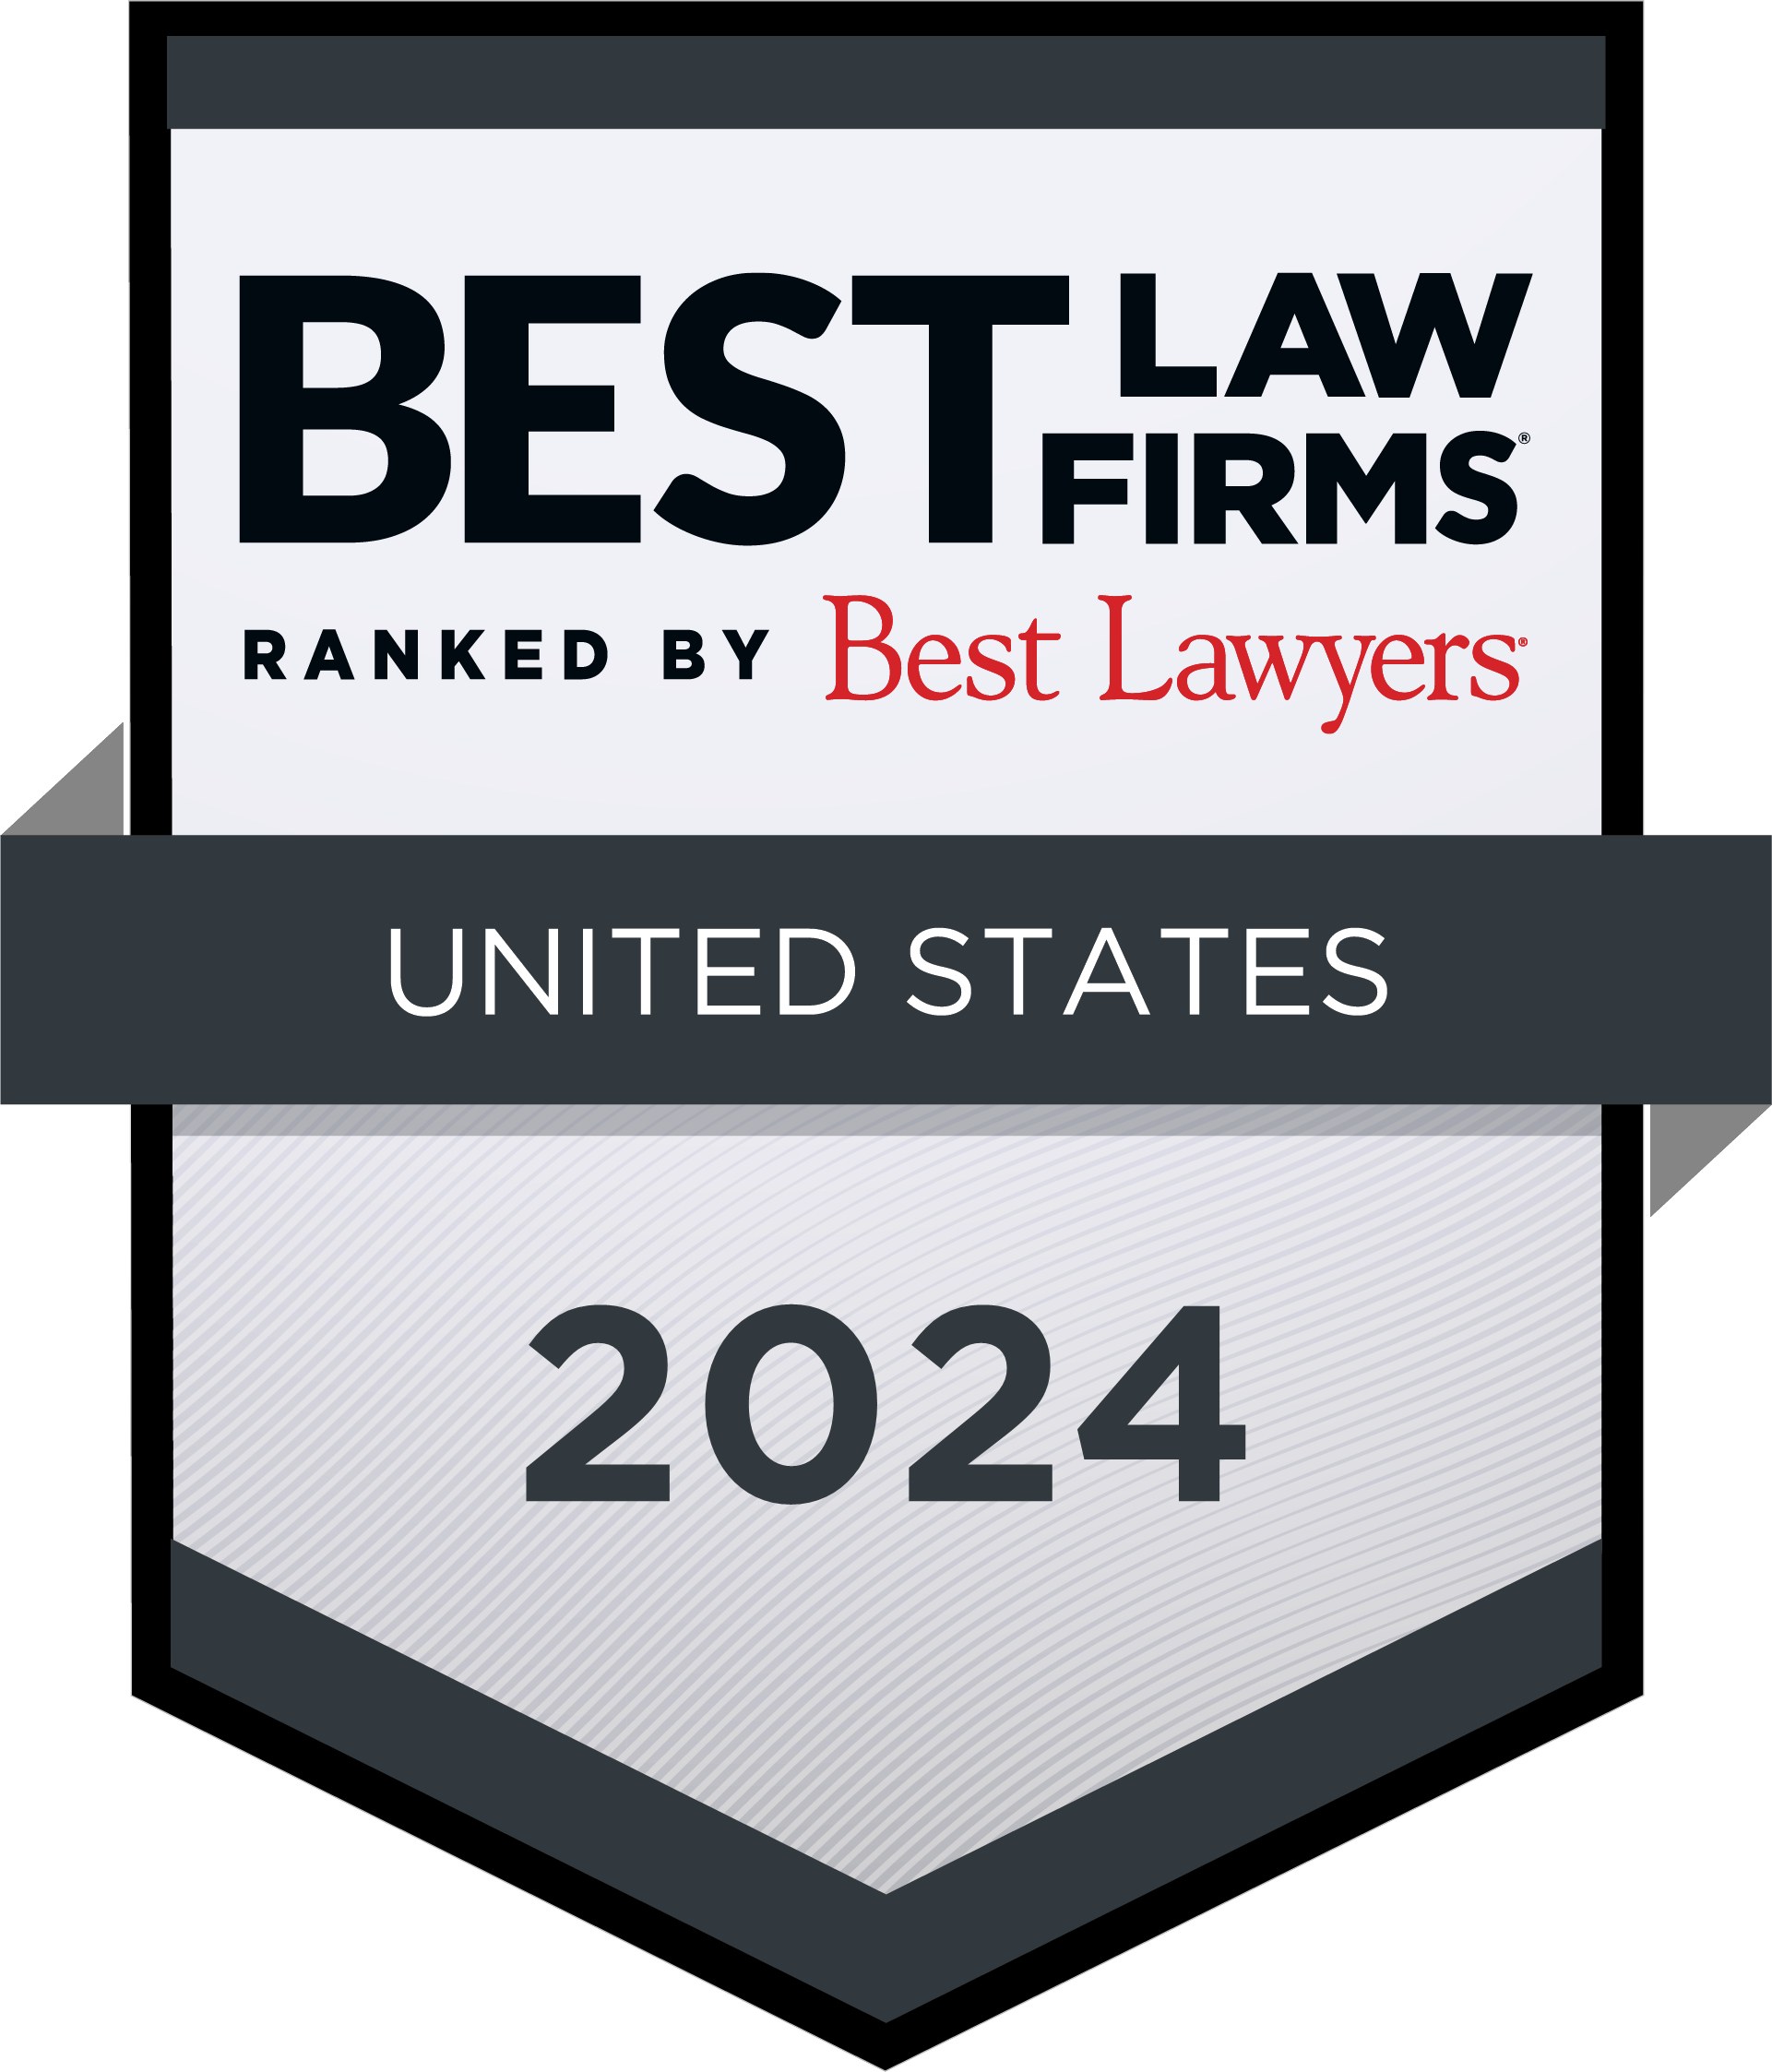 U.S. News - Law Firm of the Year